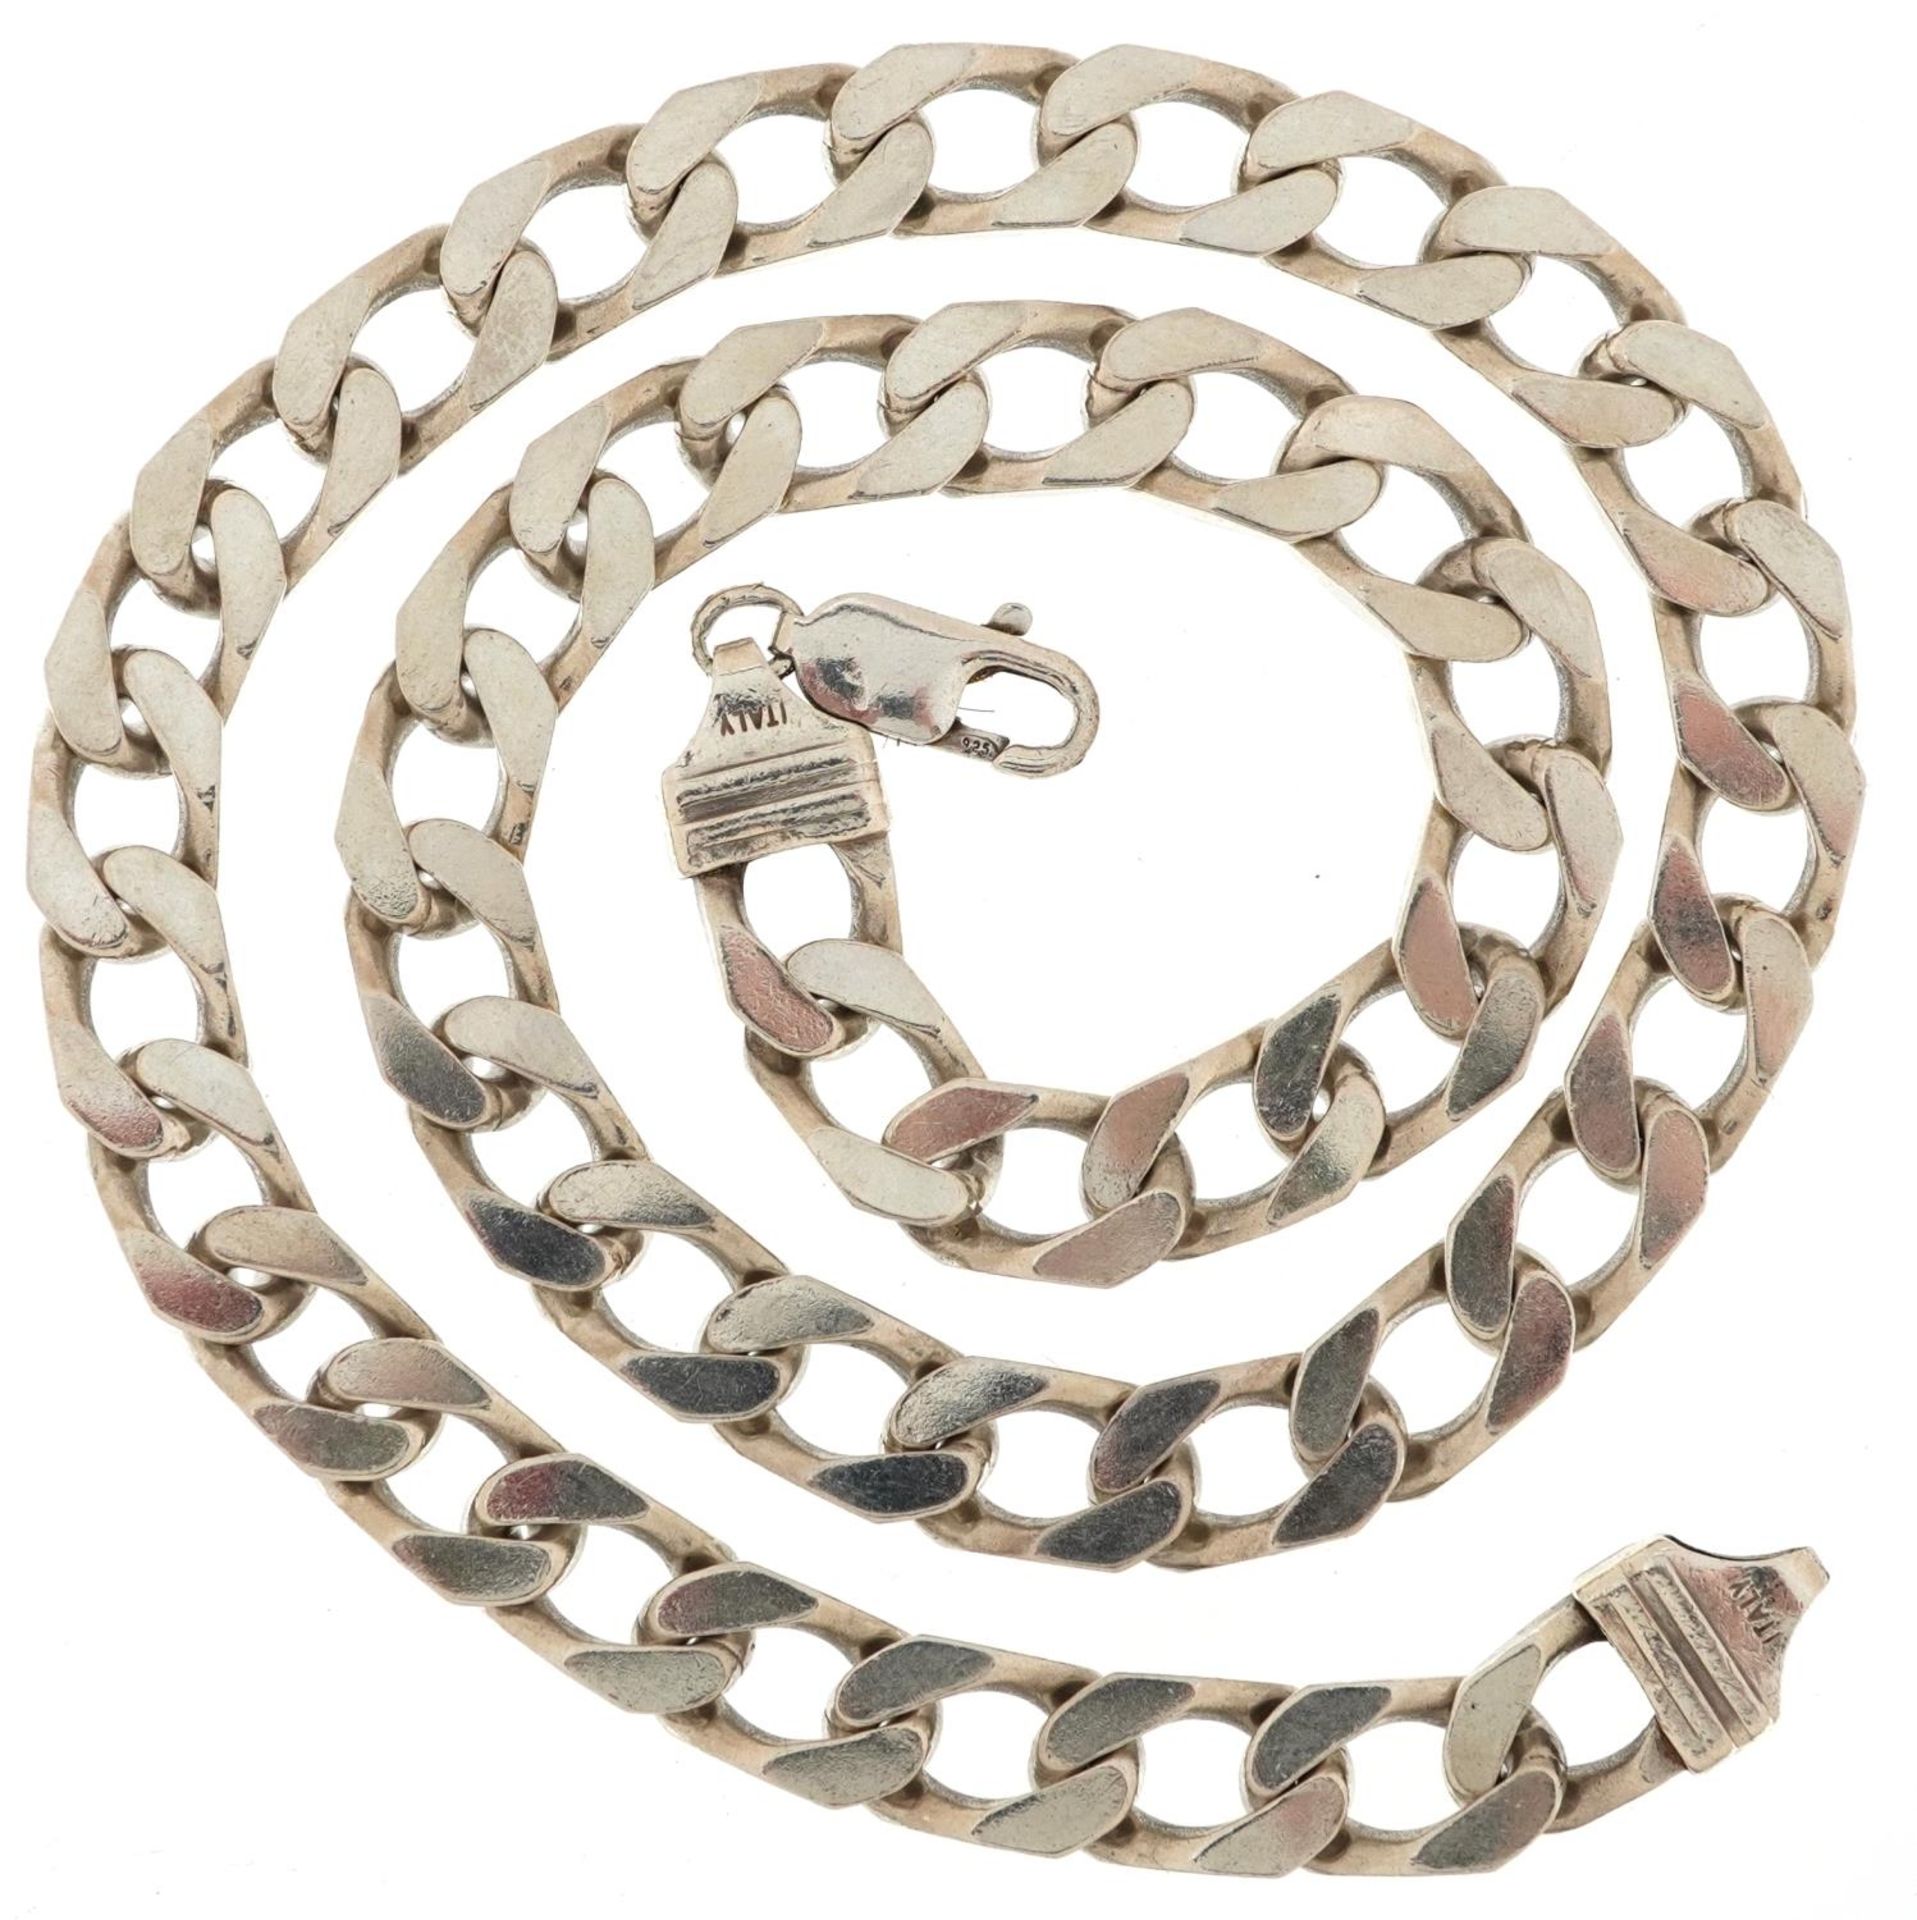 Silver curb link necklace, 46cm in length, 74.0g - Image 2 of 3